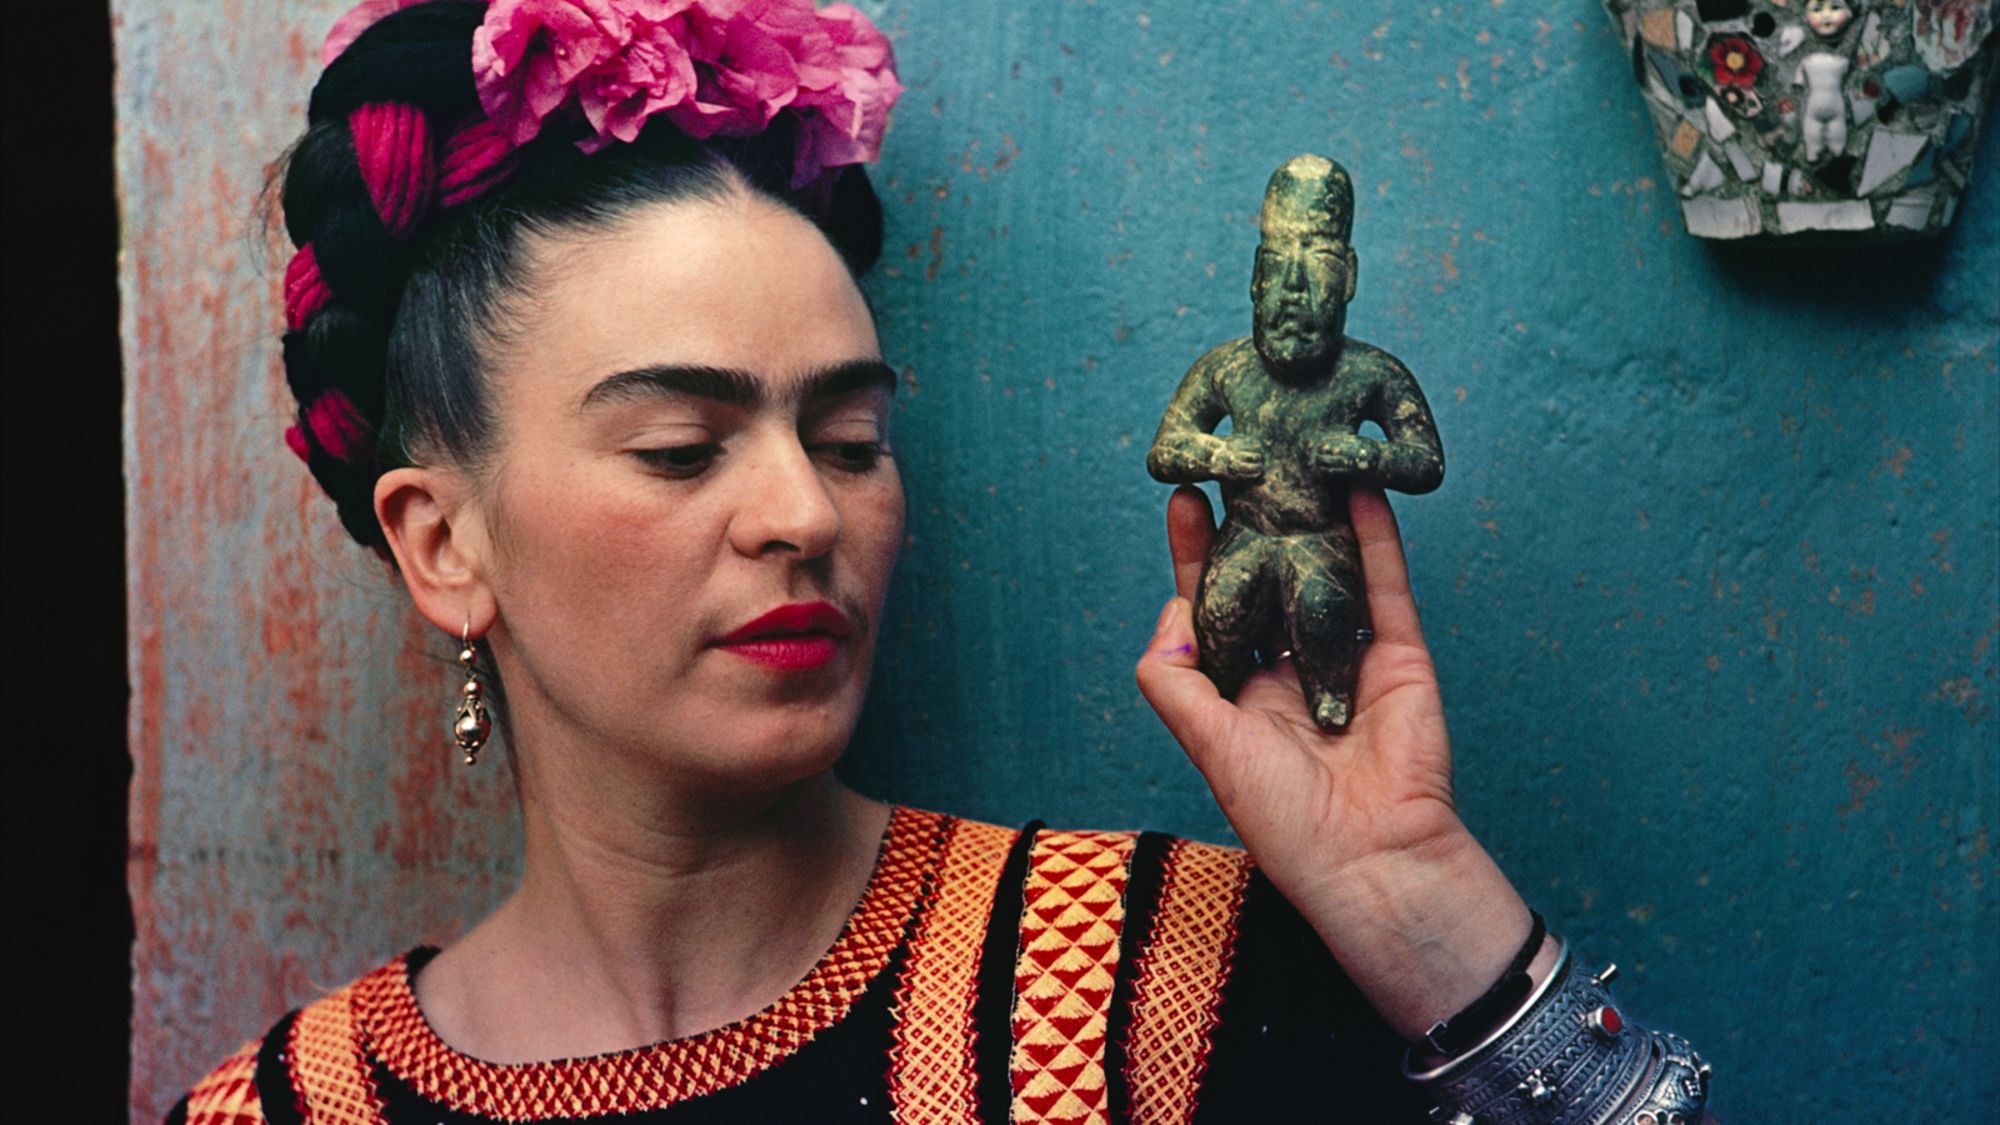 Mexican Frida Kahlo Costume for Girls. The coolest